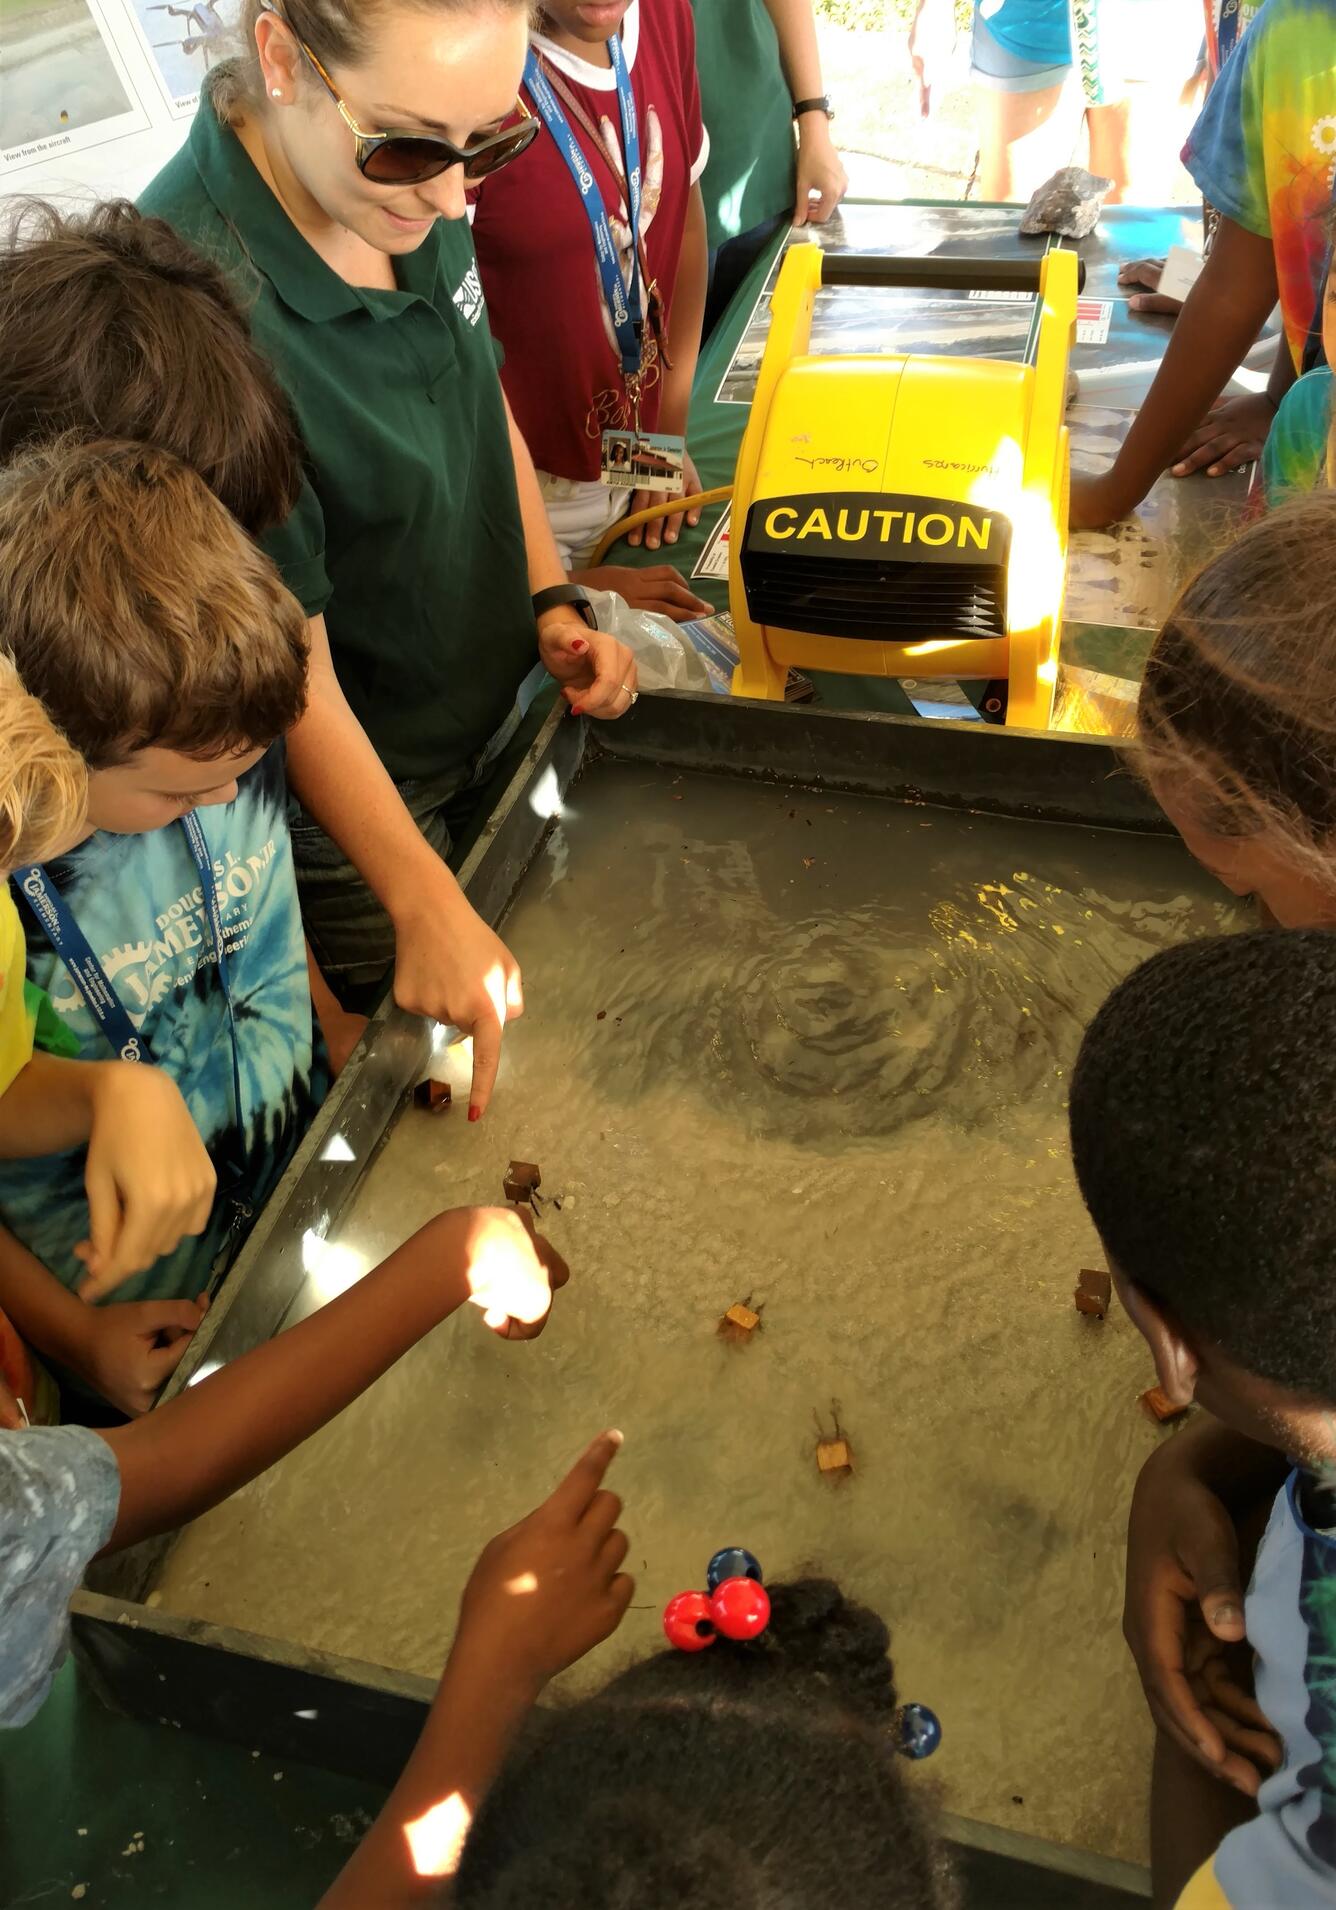 USGS shares science outreach at St. Pete Science Festival